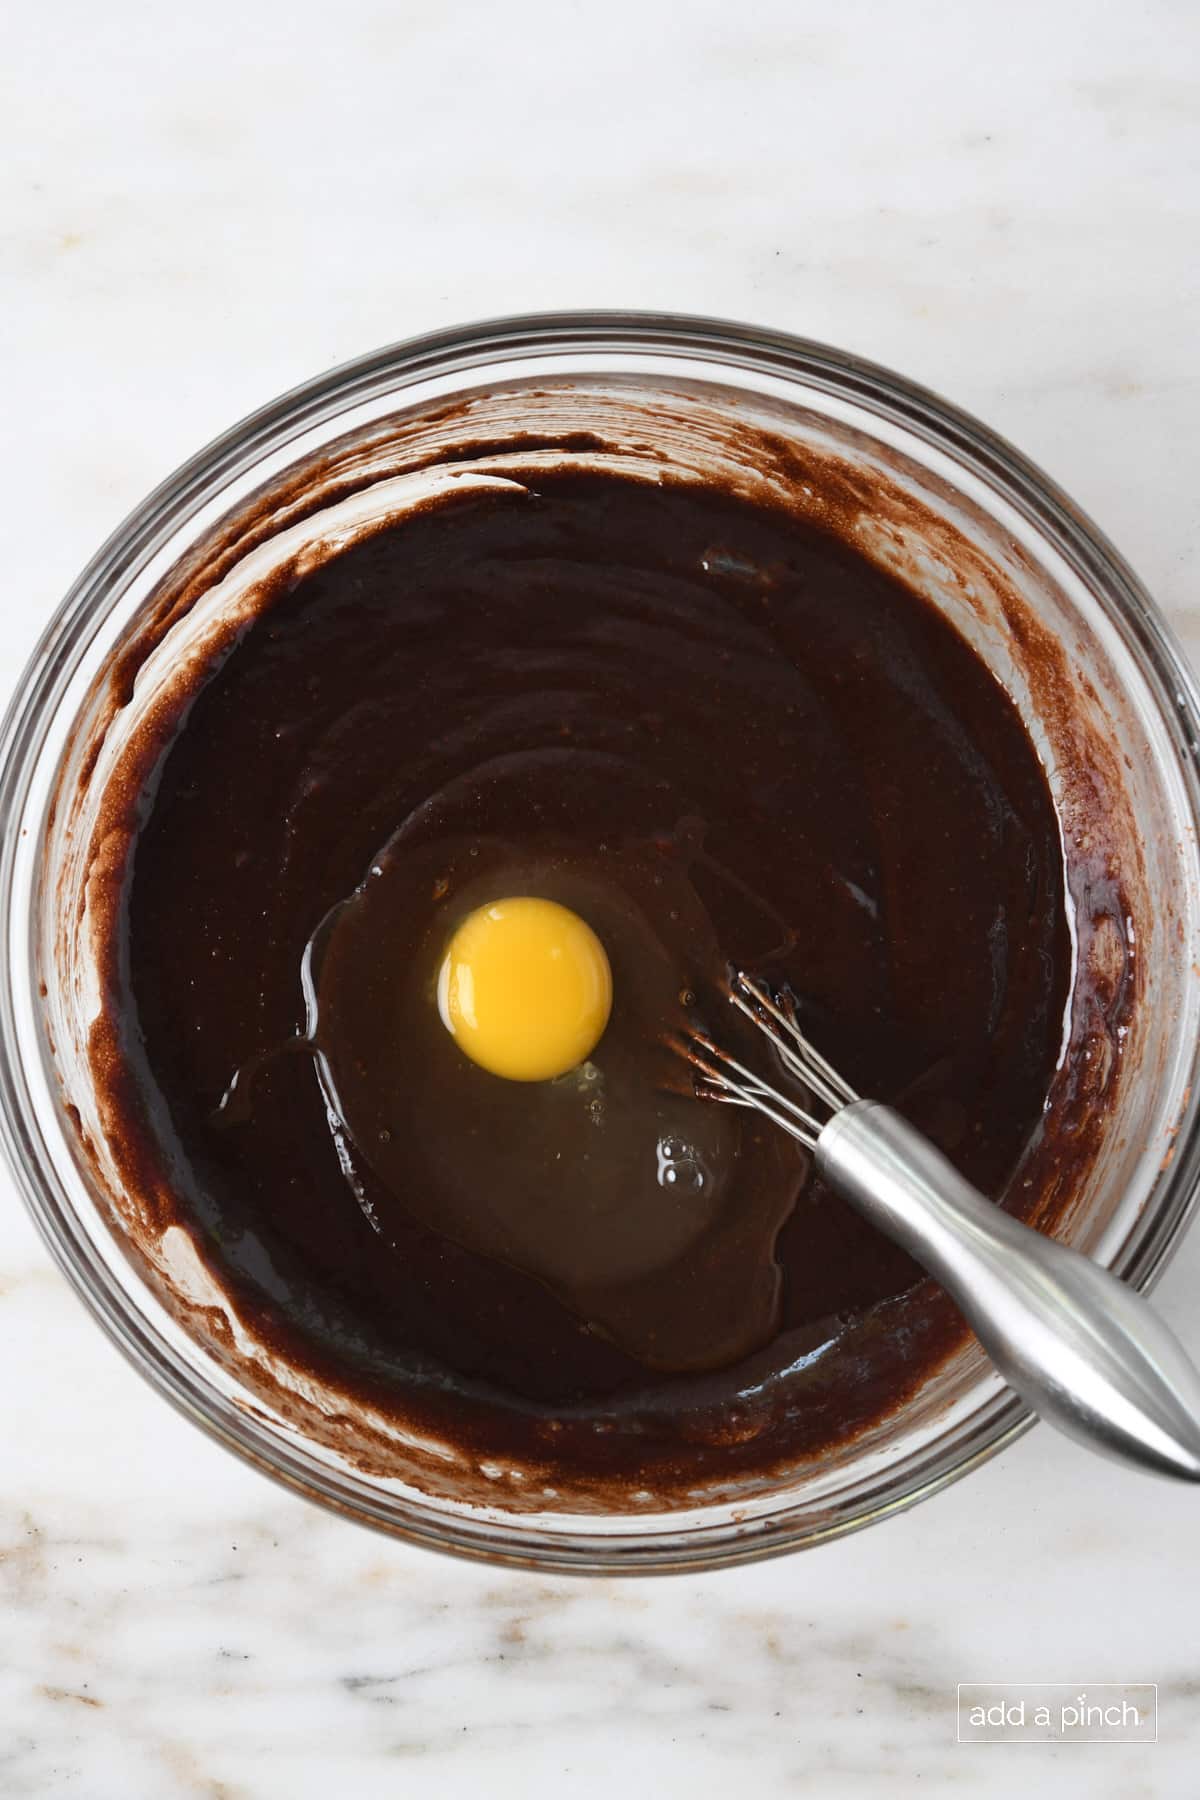 Egg added to chocolate mixture in a glass bowl with a metal whisk.